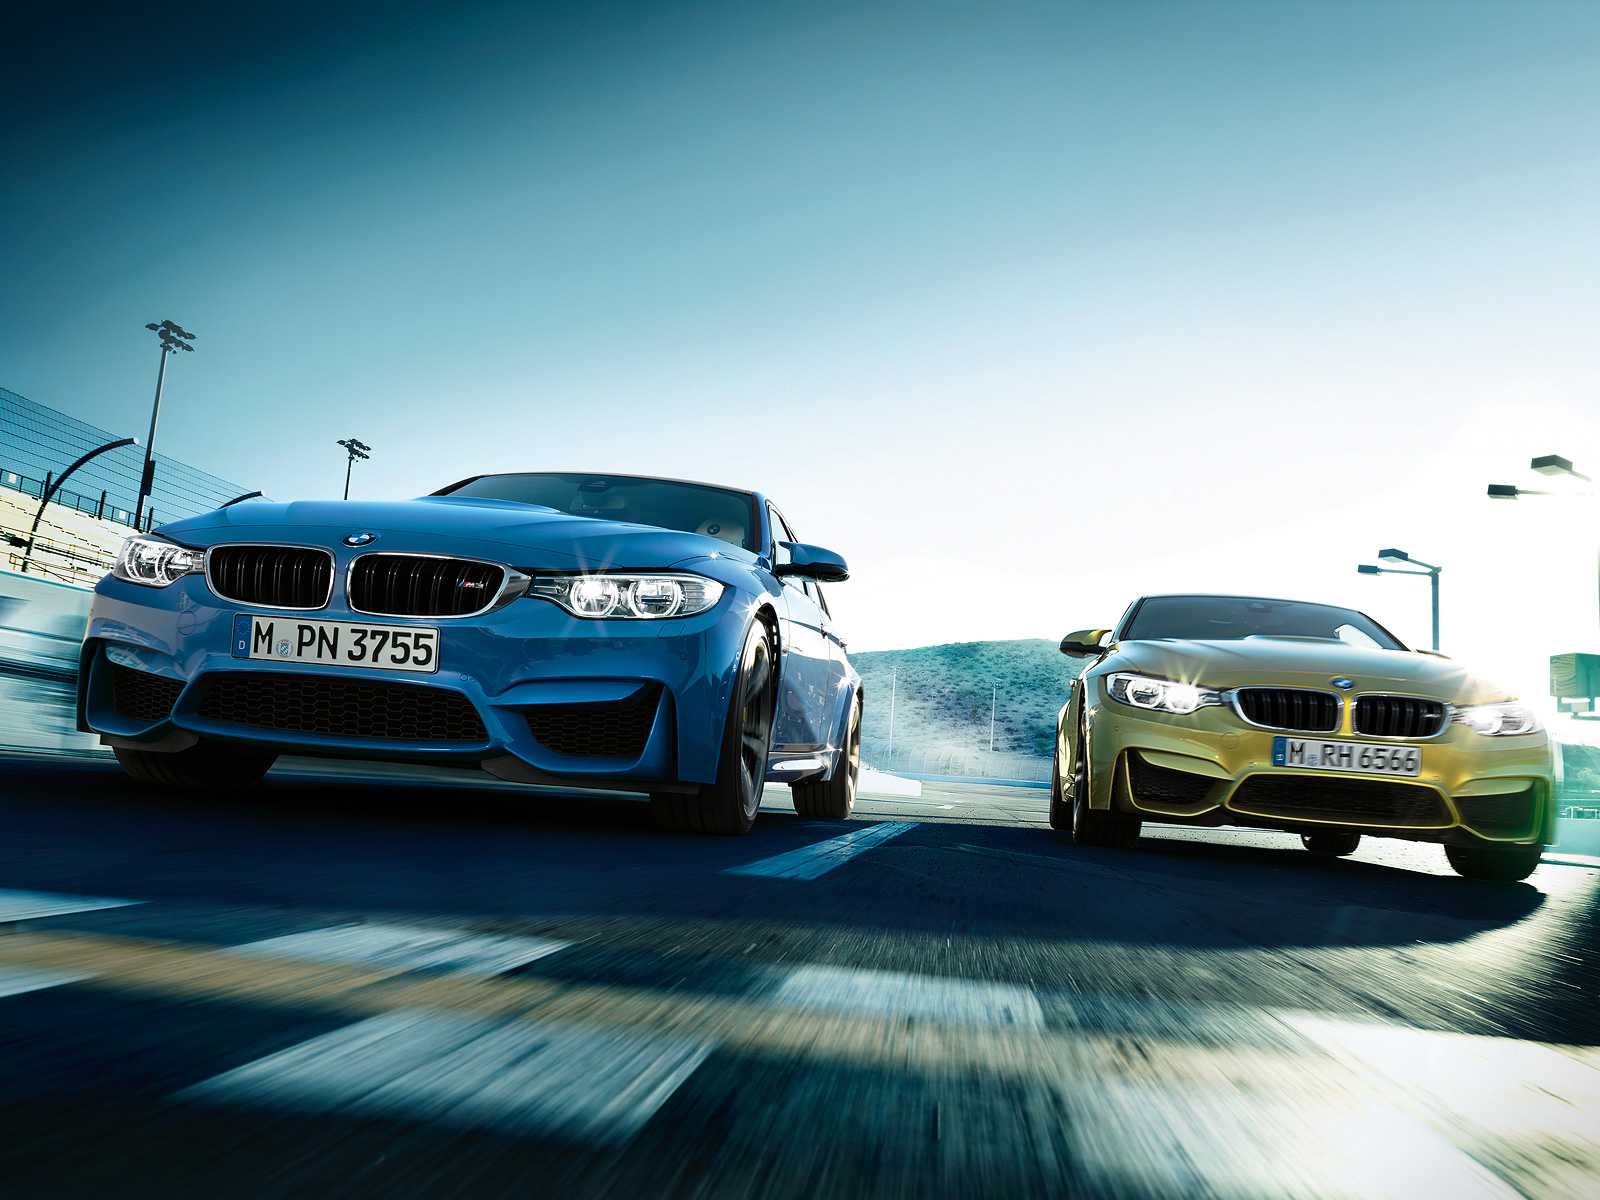 2015 BMW M3 and M4 Launched in India at Rs. Rs. 1.19 Crores and Rs. 1.21 Crores (ex-Showroom, All India) respectively